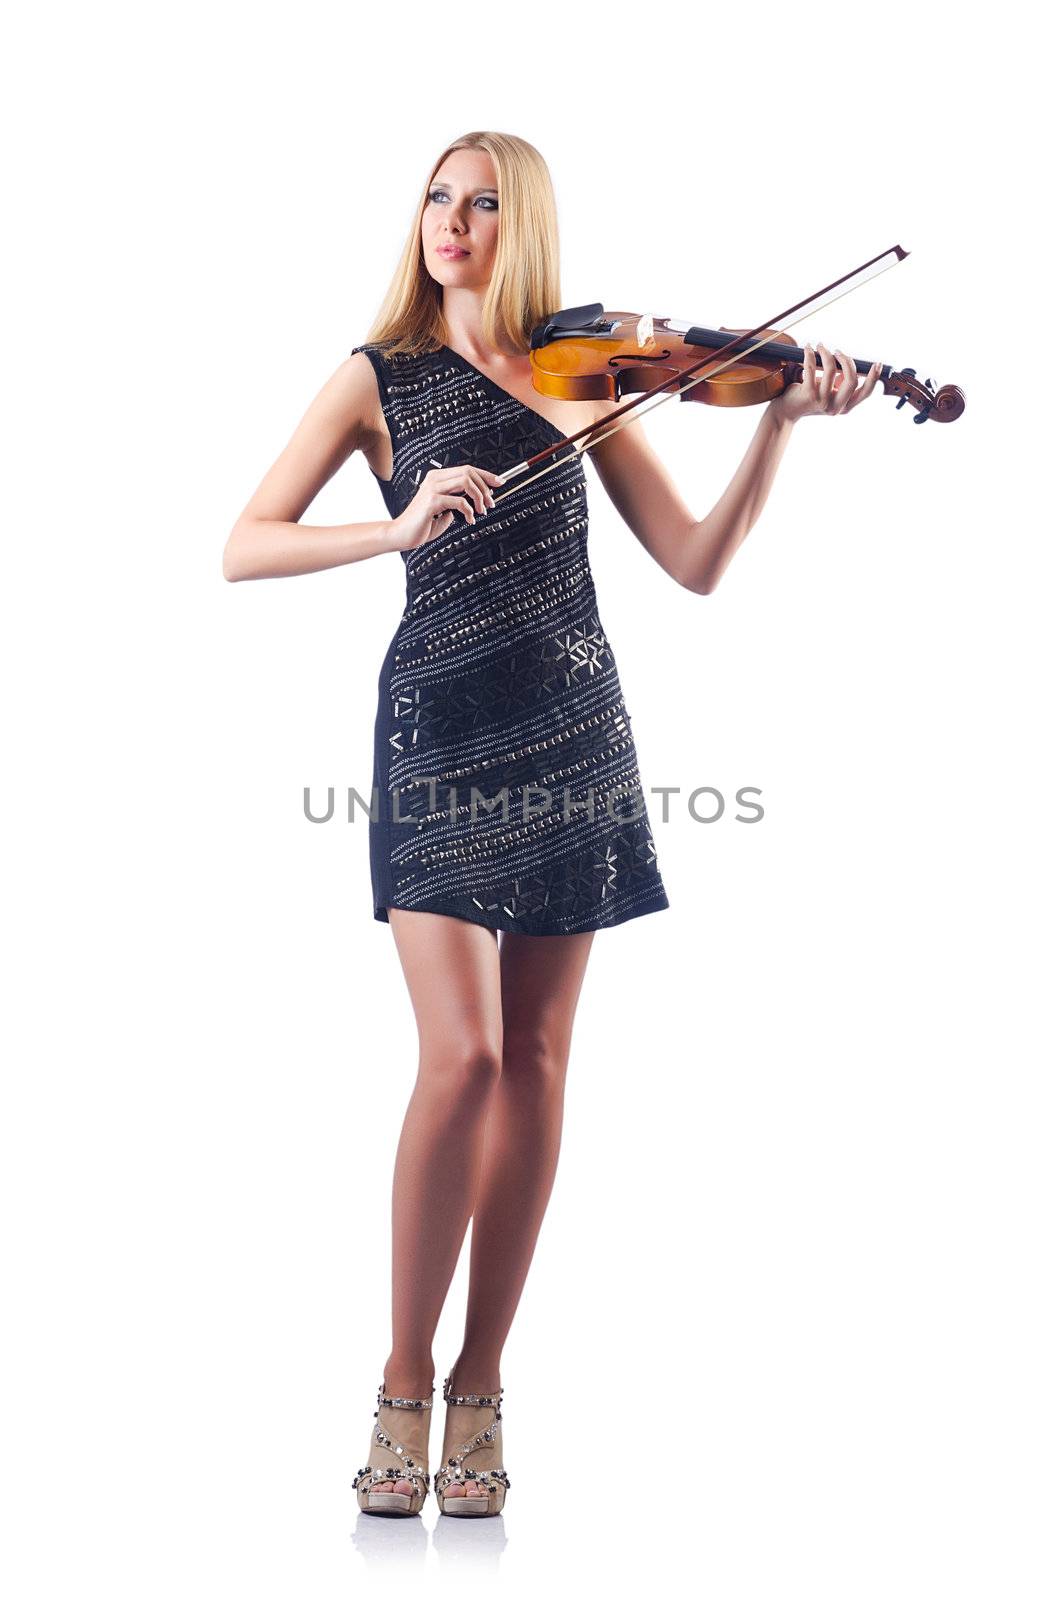 Young woman playing violin on white by Elnur